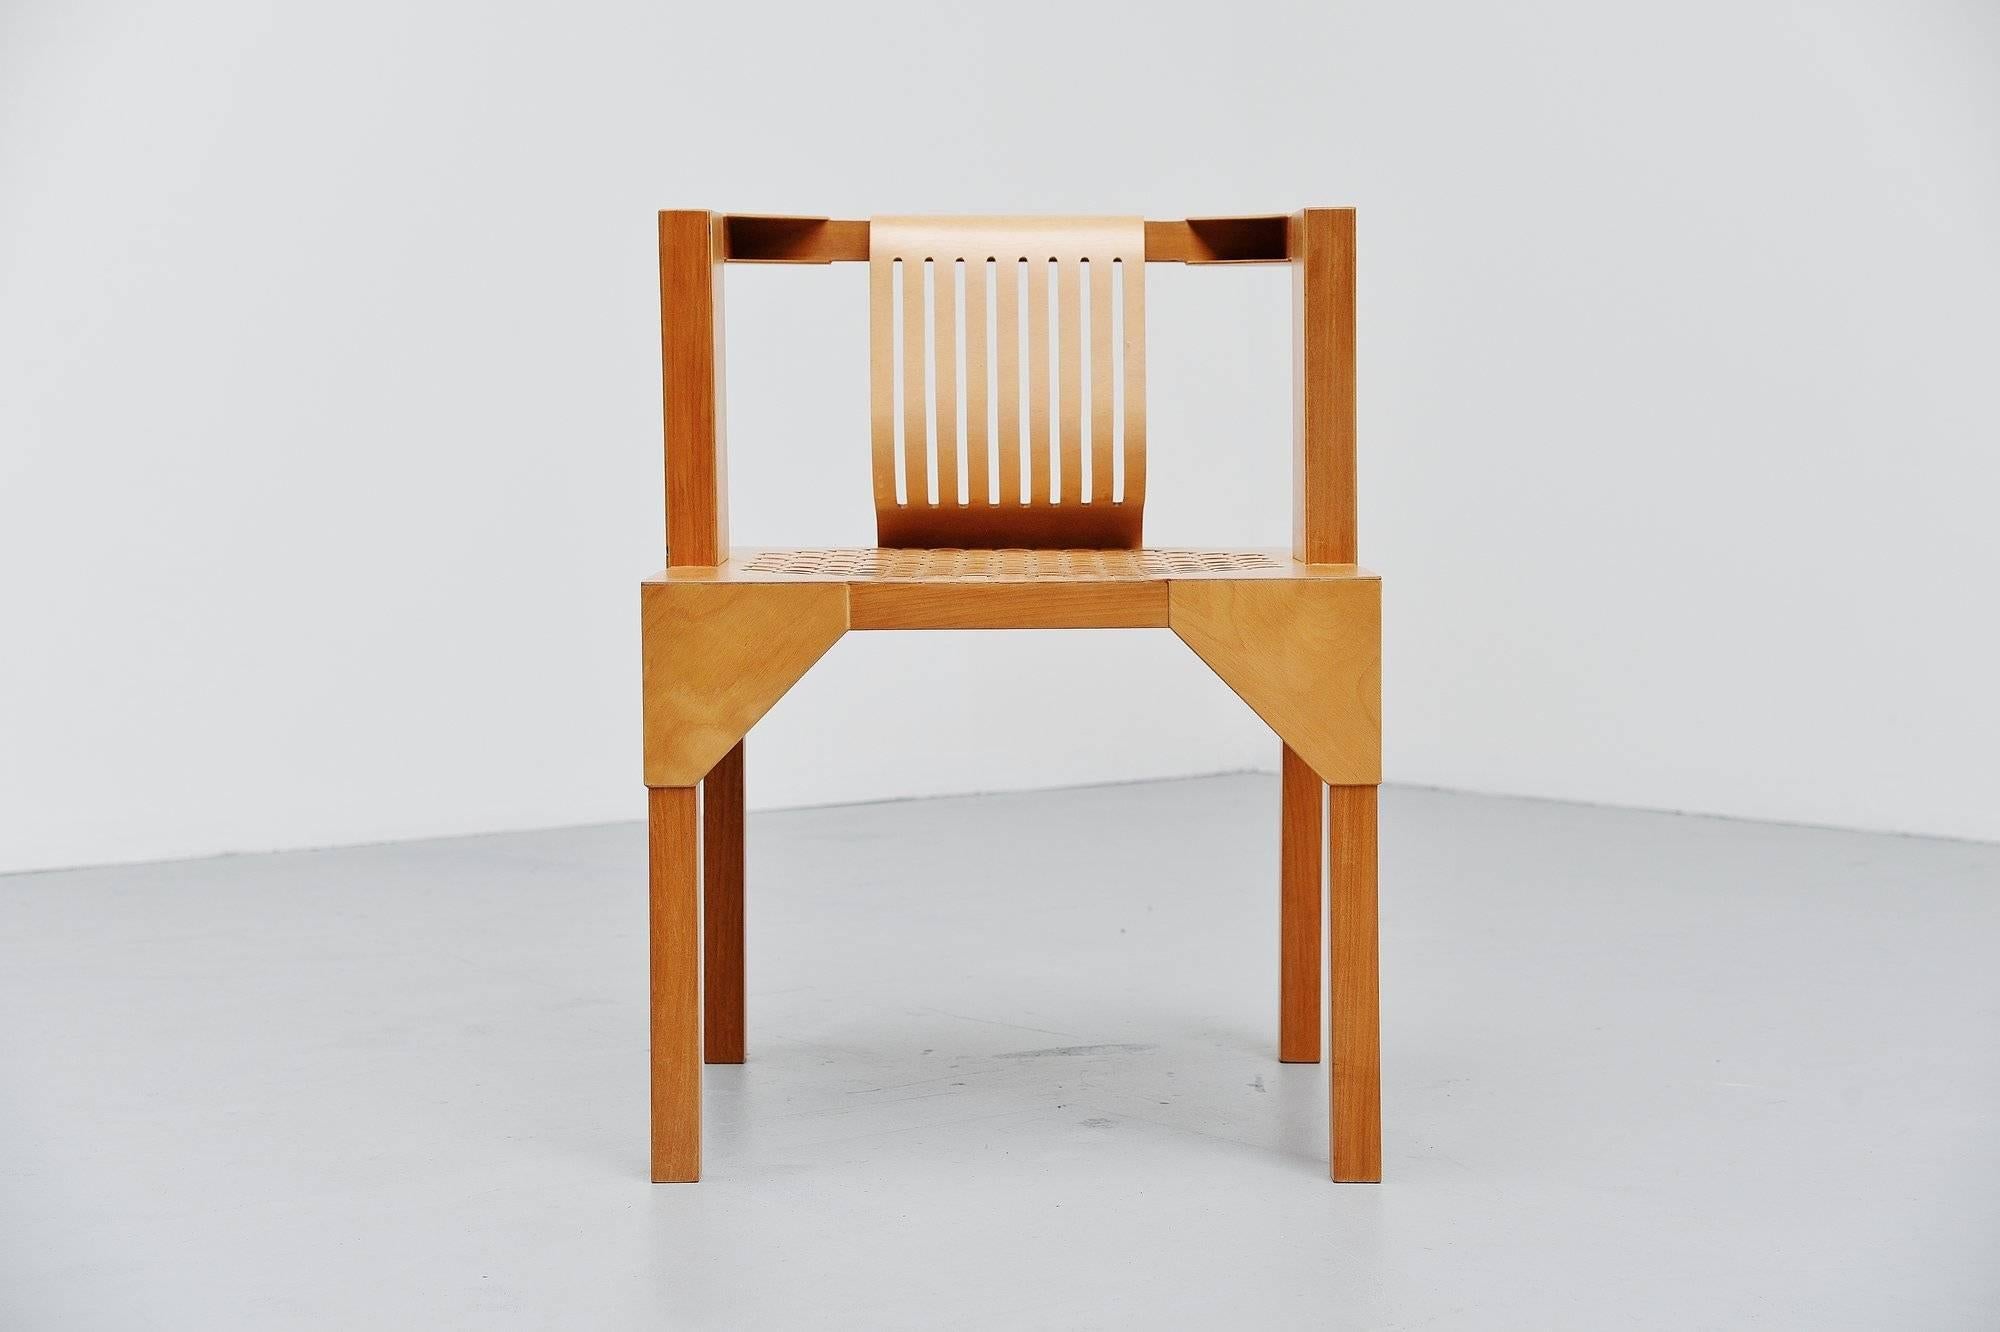 Very nice modernist armchair designed by Ruud Jan Kokke, manufatured by Kokke, Holland, 1986. This chair is made of birch plywood and solid birch legs. It has a very nice woven seat and plywood back. Kokke was well known for its artistic birch and